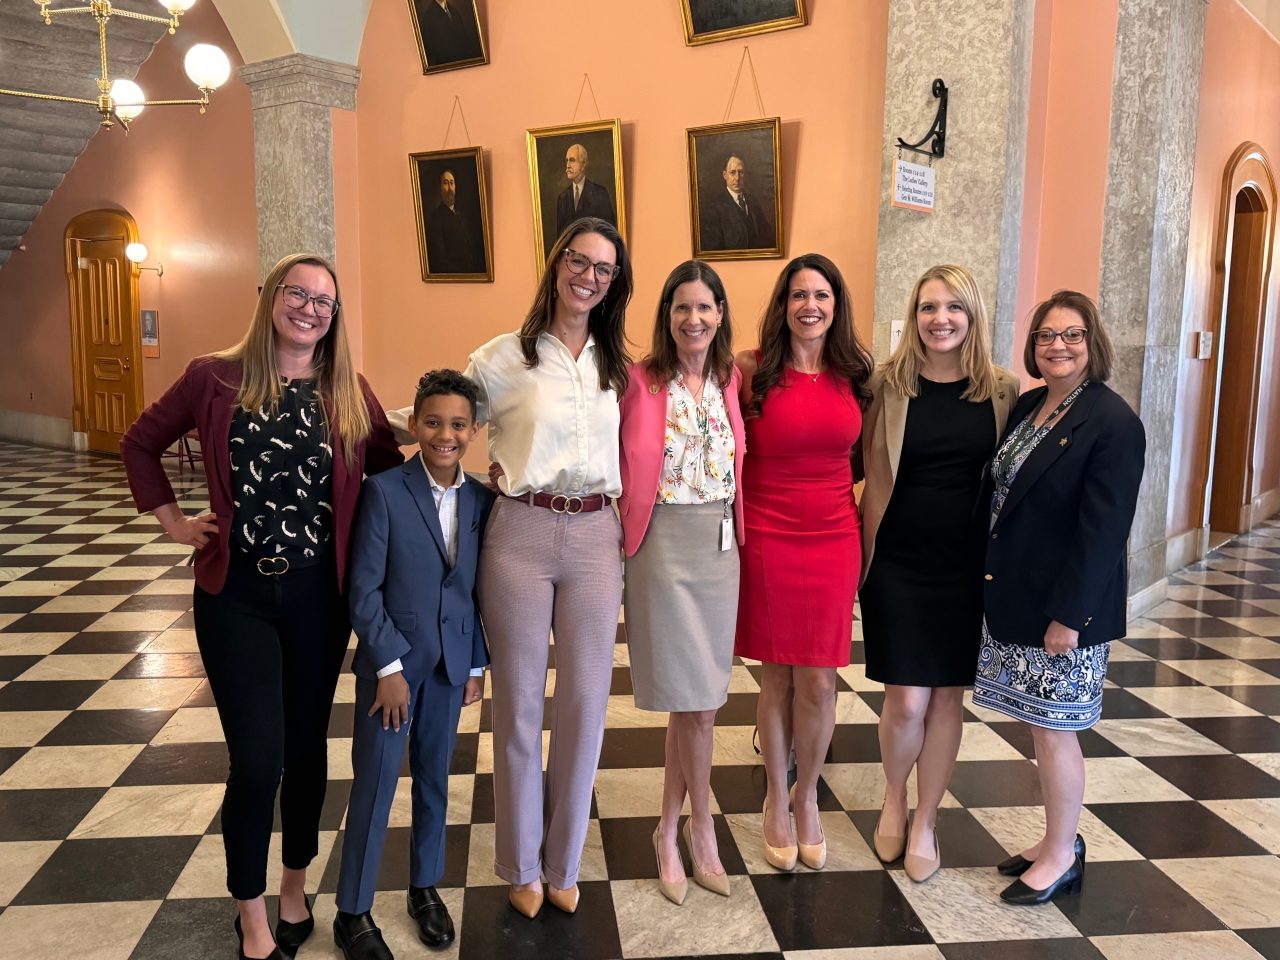 Representative Richardson joined alongside advocates for victims and survivors of human trafficking following their testimony in support of her legislation, the Expanding Human Trafficking Justice Act